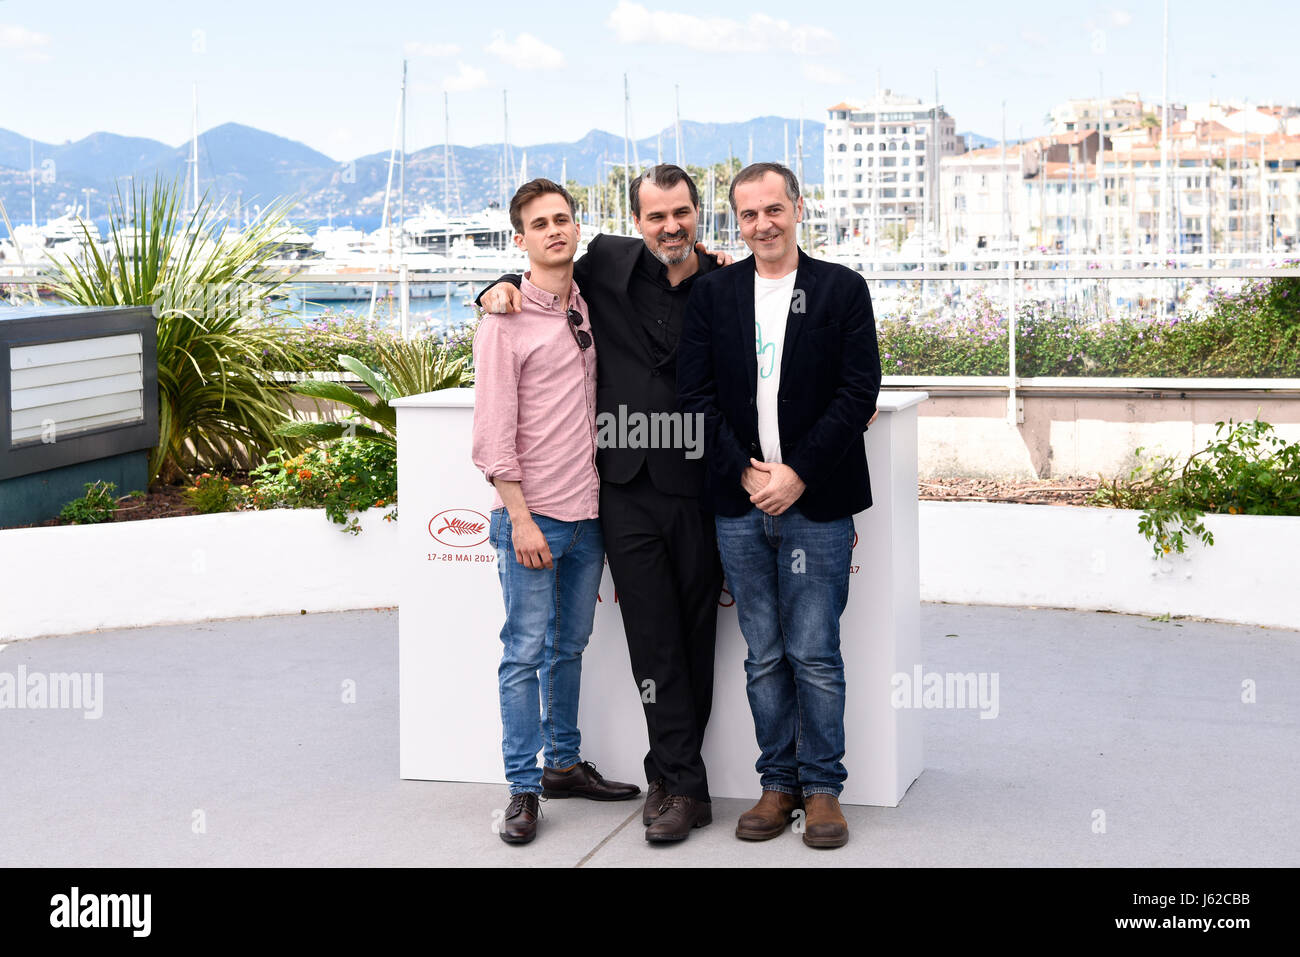 Cannes, France. 19th May, 2017. Actor Zsombor Jeger, director Kornel Mundruczo and actor Merab Ninidze (from L to R) of the film 'Jupiter's Moon' pose for a photocall in Cannes, France, on May 19, 2017. The film 'Jupiter's Moon' directed by Hungarian director Kornel Mundruczo will compete for the Palme d'Or on the 70th Cannes Film Festival. Credit: Chen Yichen/Xinhua/Alamy Live News Stock Photo